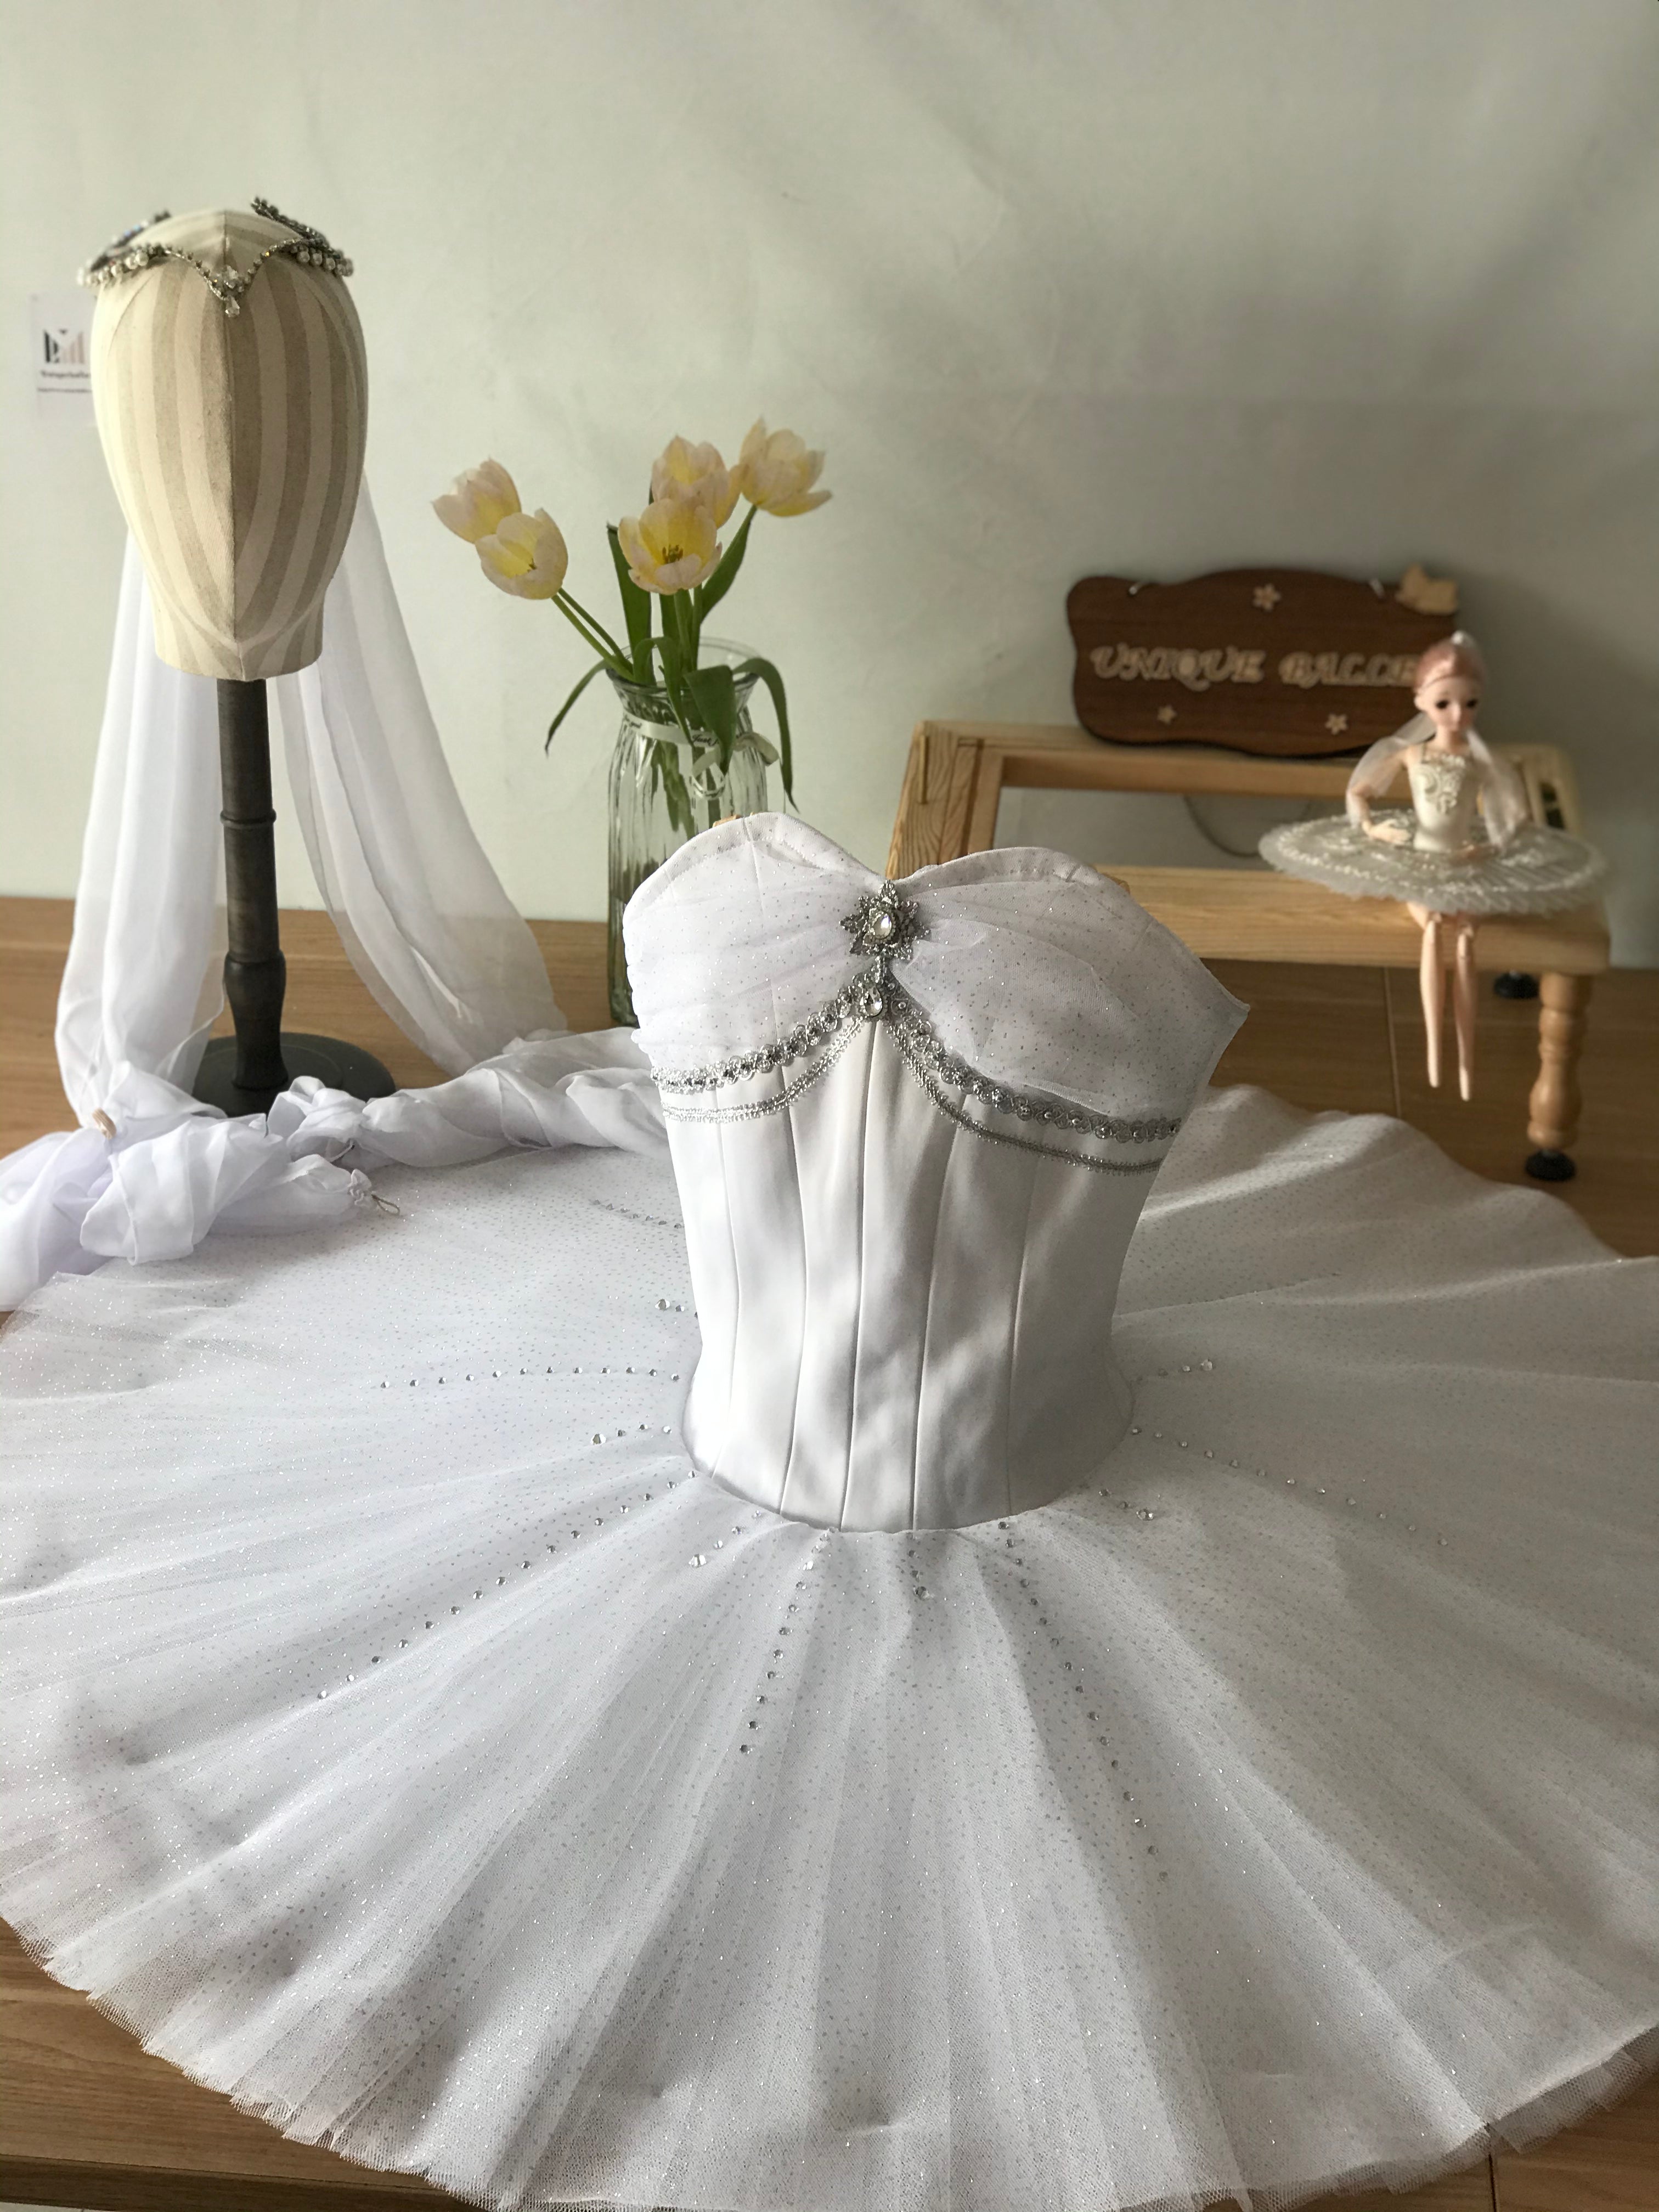 Professional Shining Rhinestones White Ballet Tutu Costume For La Bayadère The Shade Classical Ballet TuTu Stage Dance Wear With Hooks